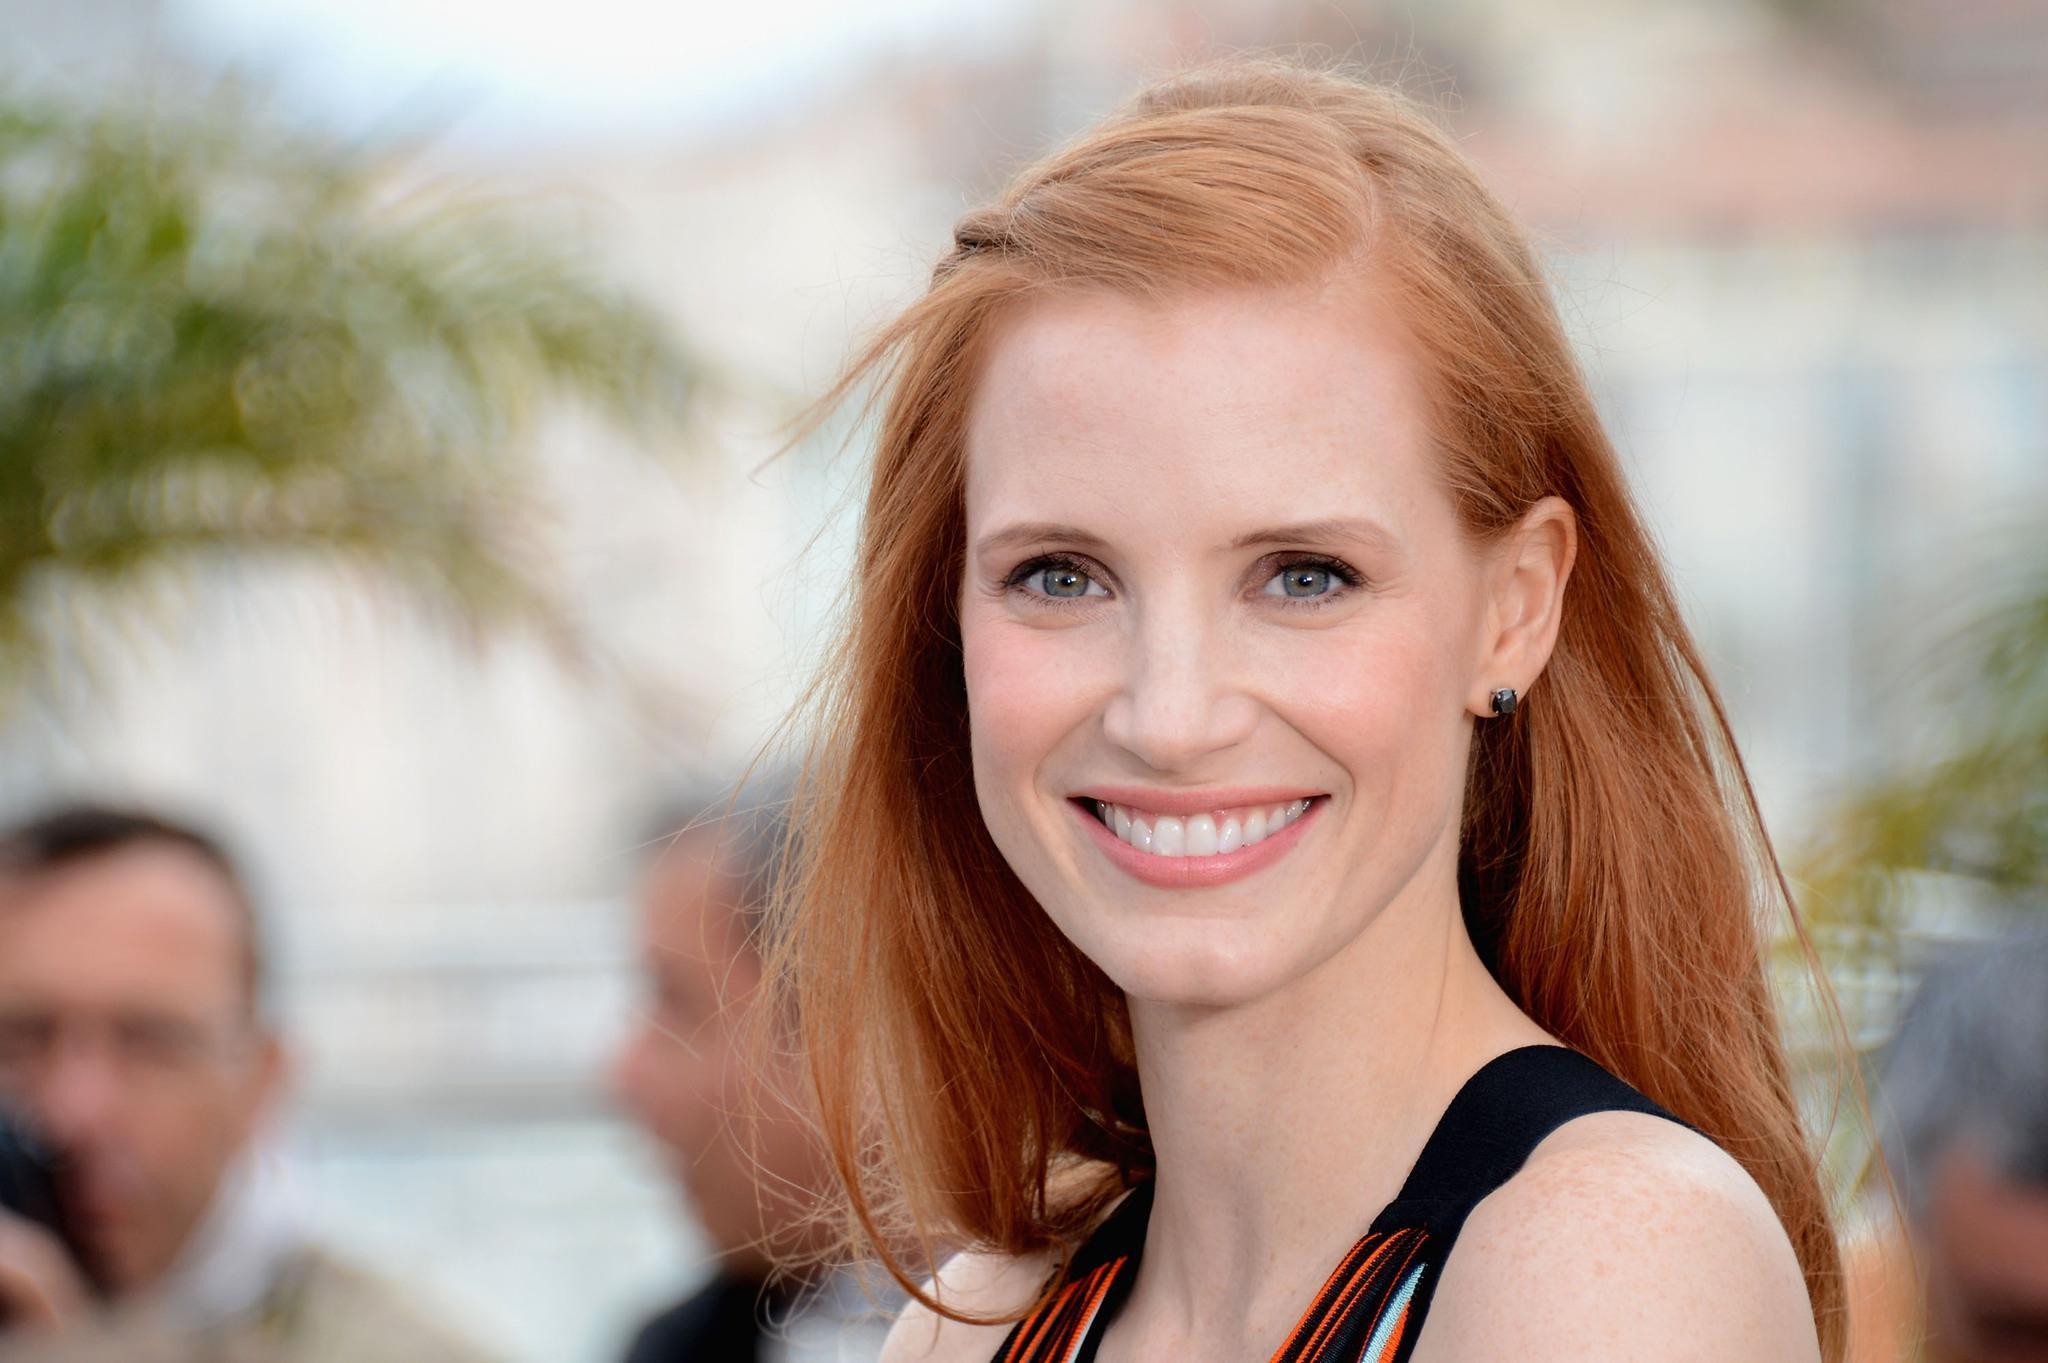 Jessica Chastain Actress Wallpaper 7202 2048x1363